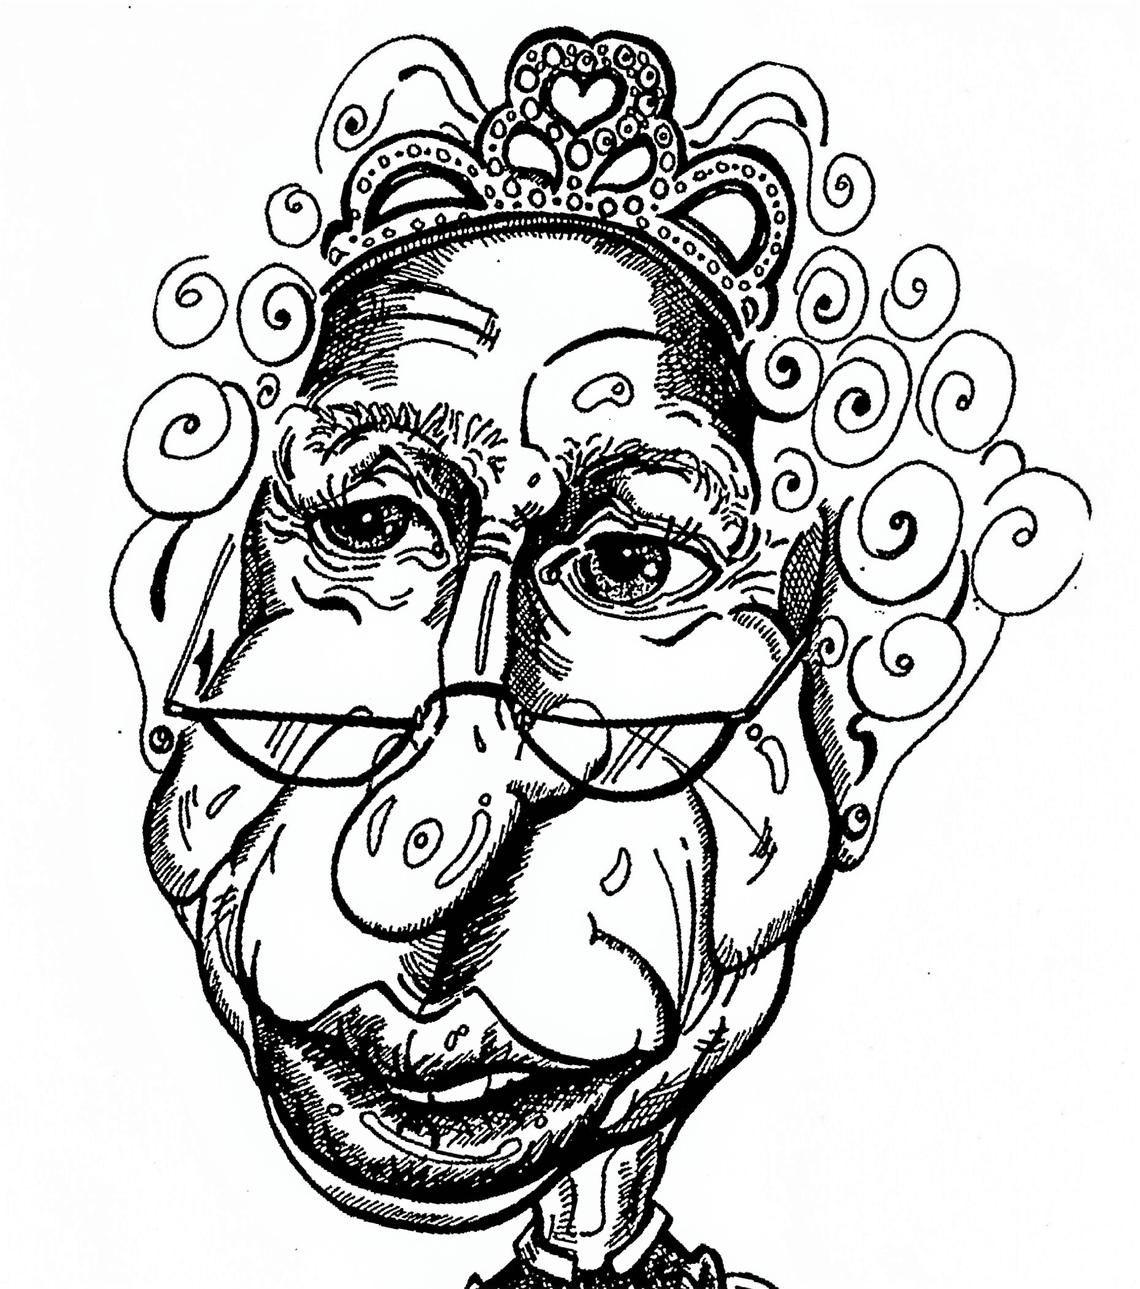 The Queen - Caricature Cartoon by Kitty Pigfish - Pigfish - Kitty Pigfish Cartoons